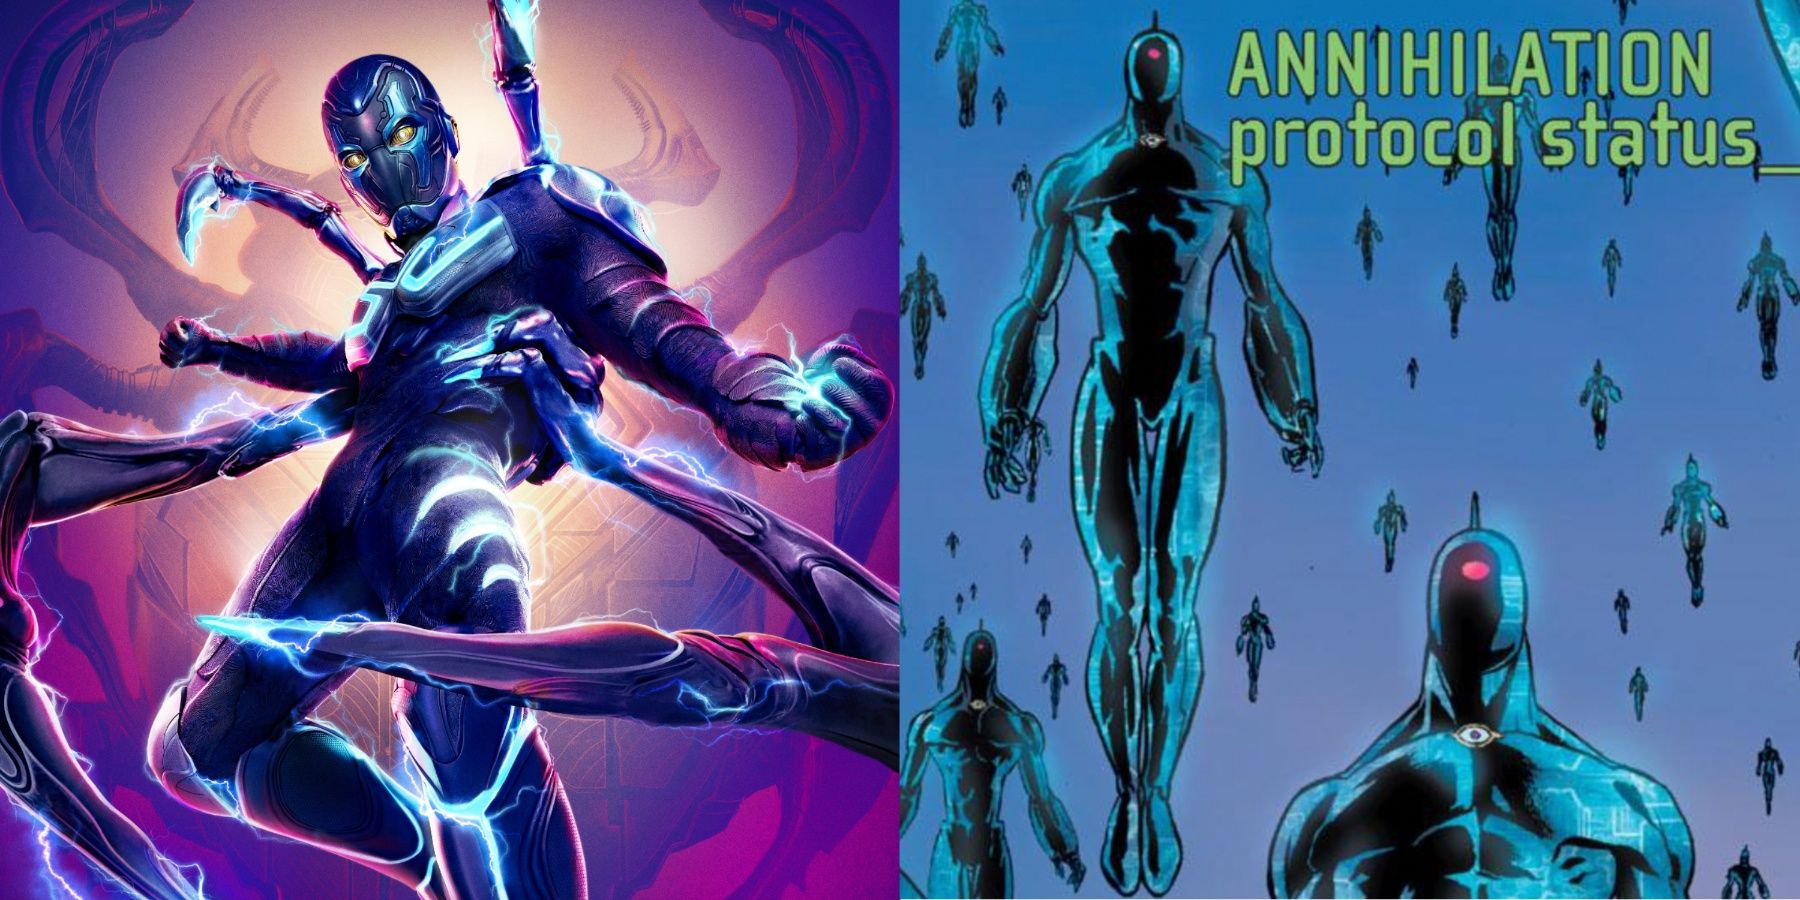 A split image features Blue Beetle in the movie poster and OMACs in DC Comics